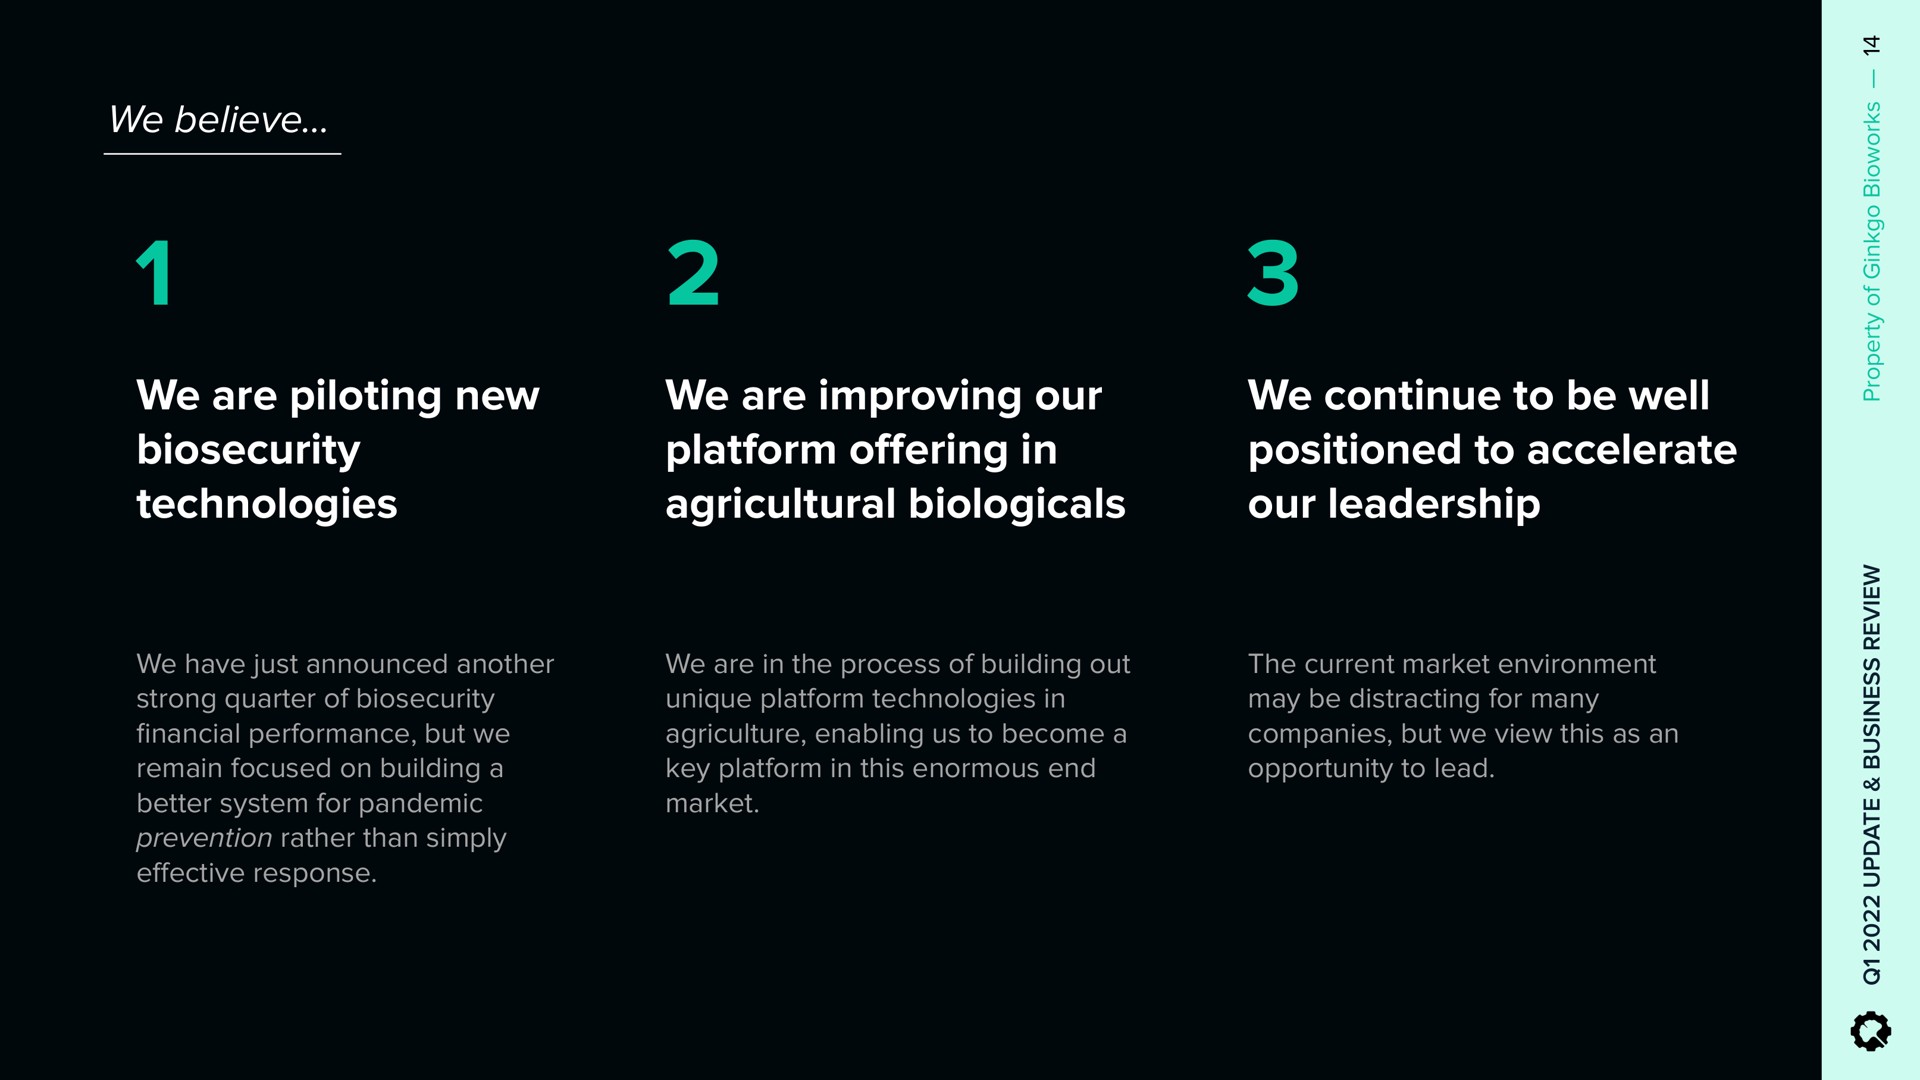 we are piloting new technologies we are improving our platform in agricultural we continue to be well positioned to accelerate our leadership offering | Ginkgo